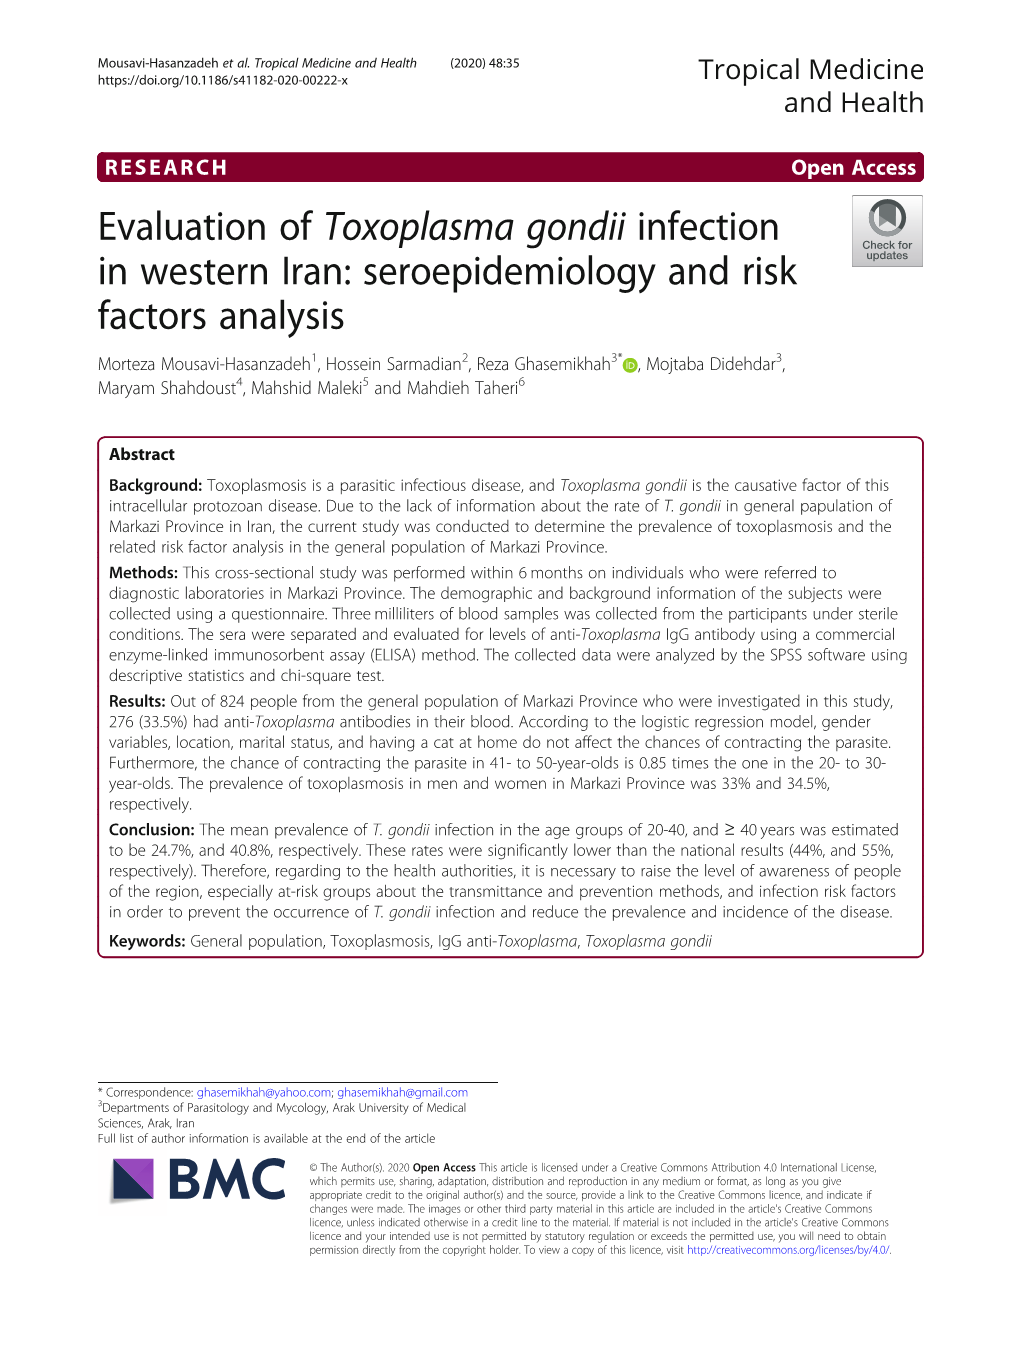 Evaluation of Toxoplasma Gondii Infection in Western Iran: Seroepidemiology and Risk Factors Analysis